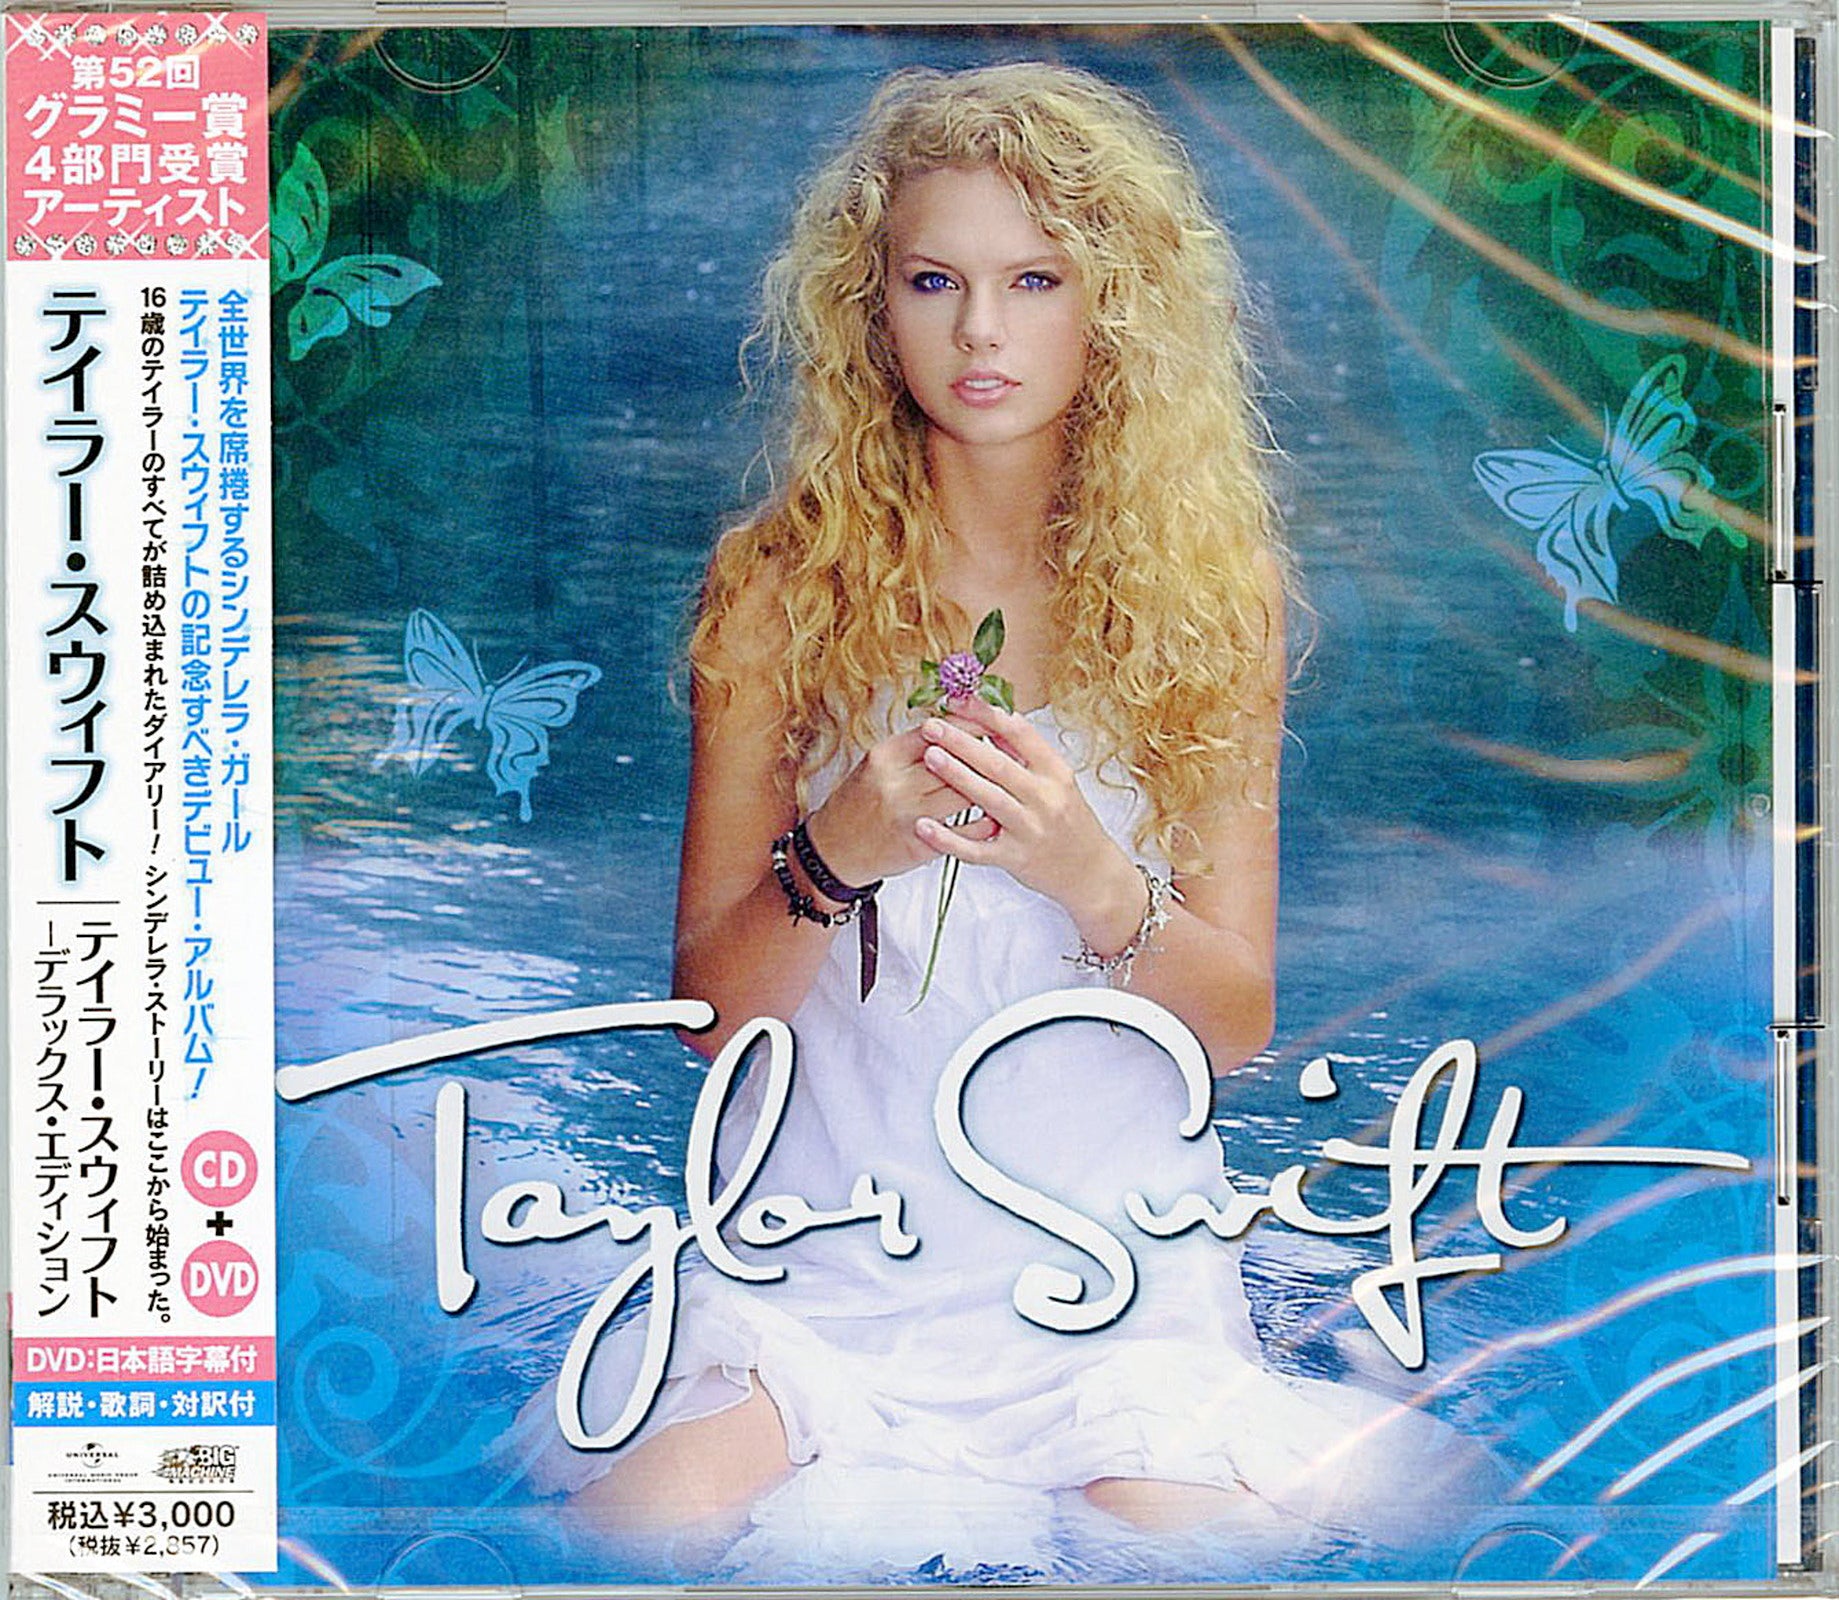 Taylor Swift - Taylor Swift Deluxe Edition - Japan CD+DVD Limited 